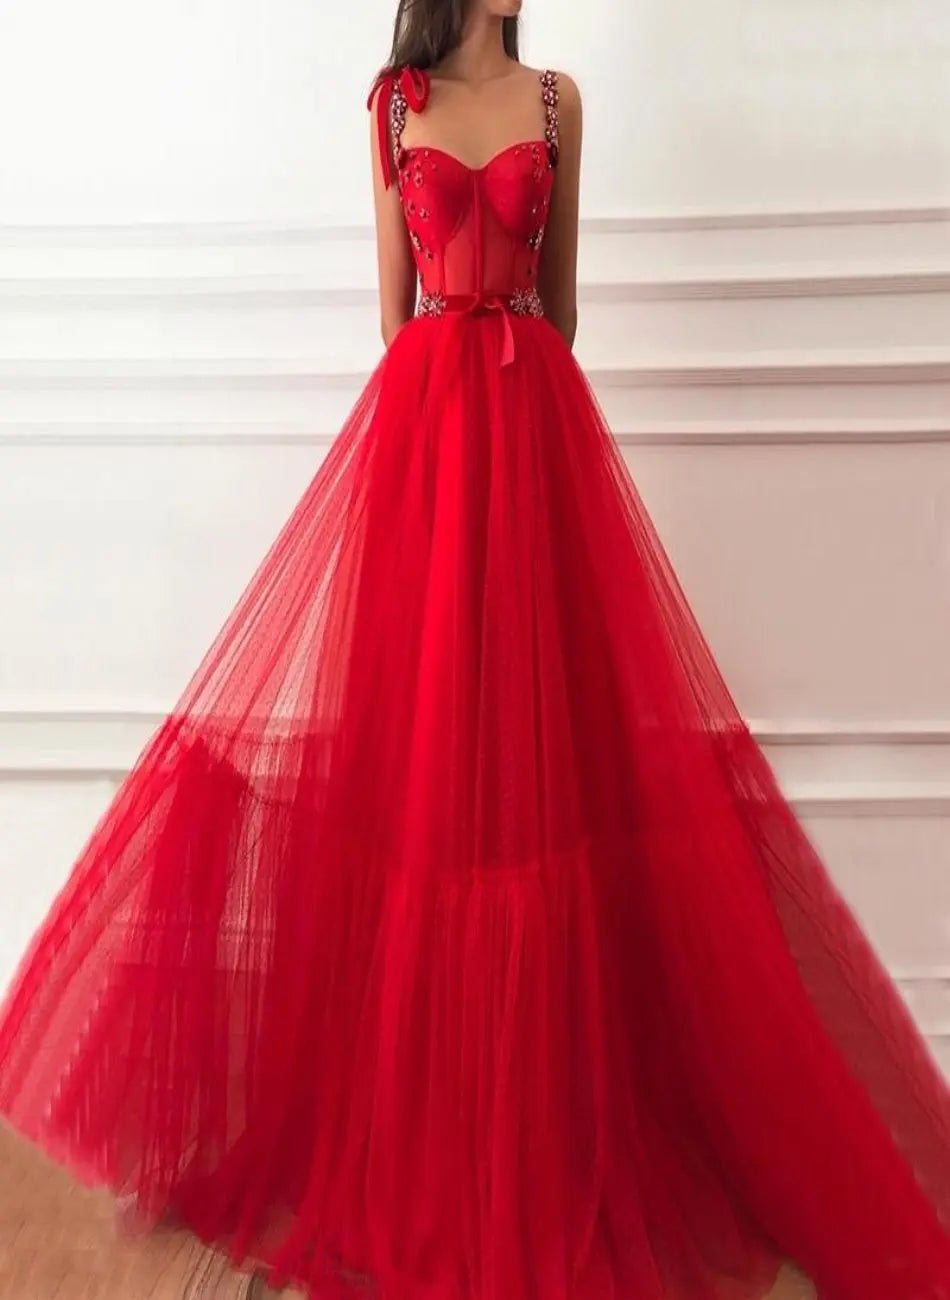 Red Crystal Bow Evening Gowns - Mscooco.co.uk